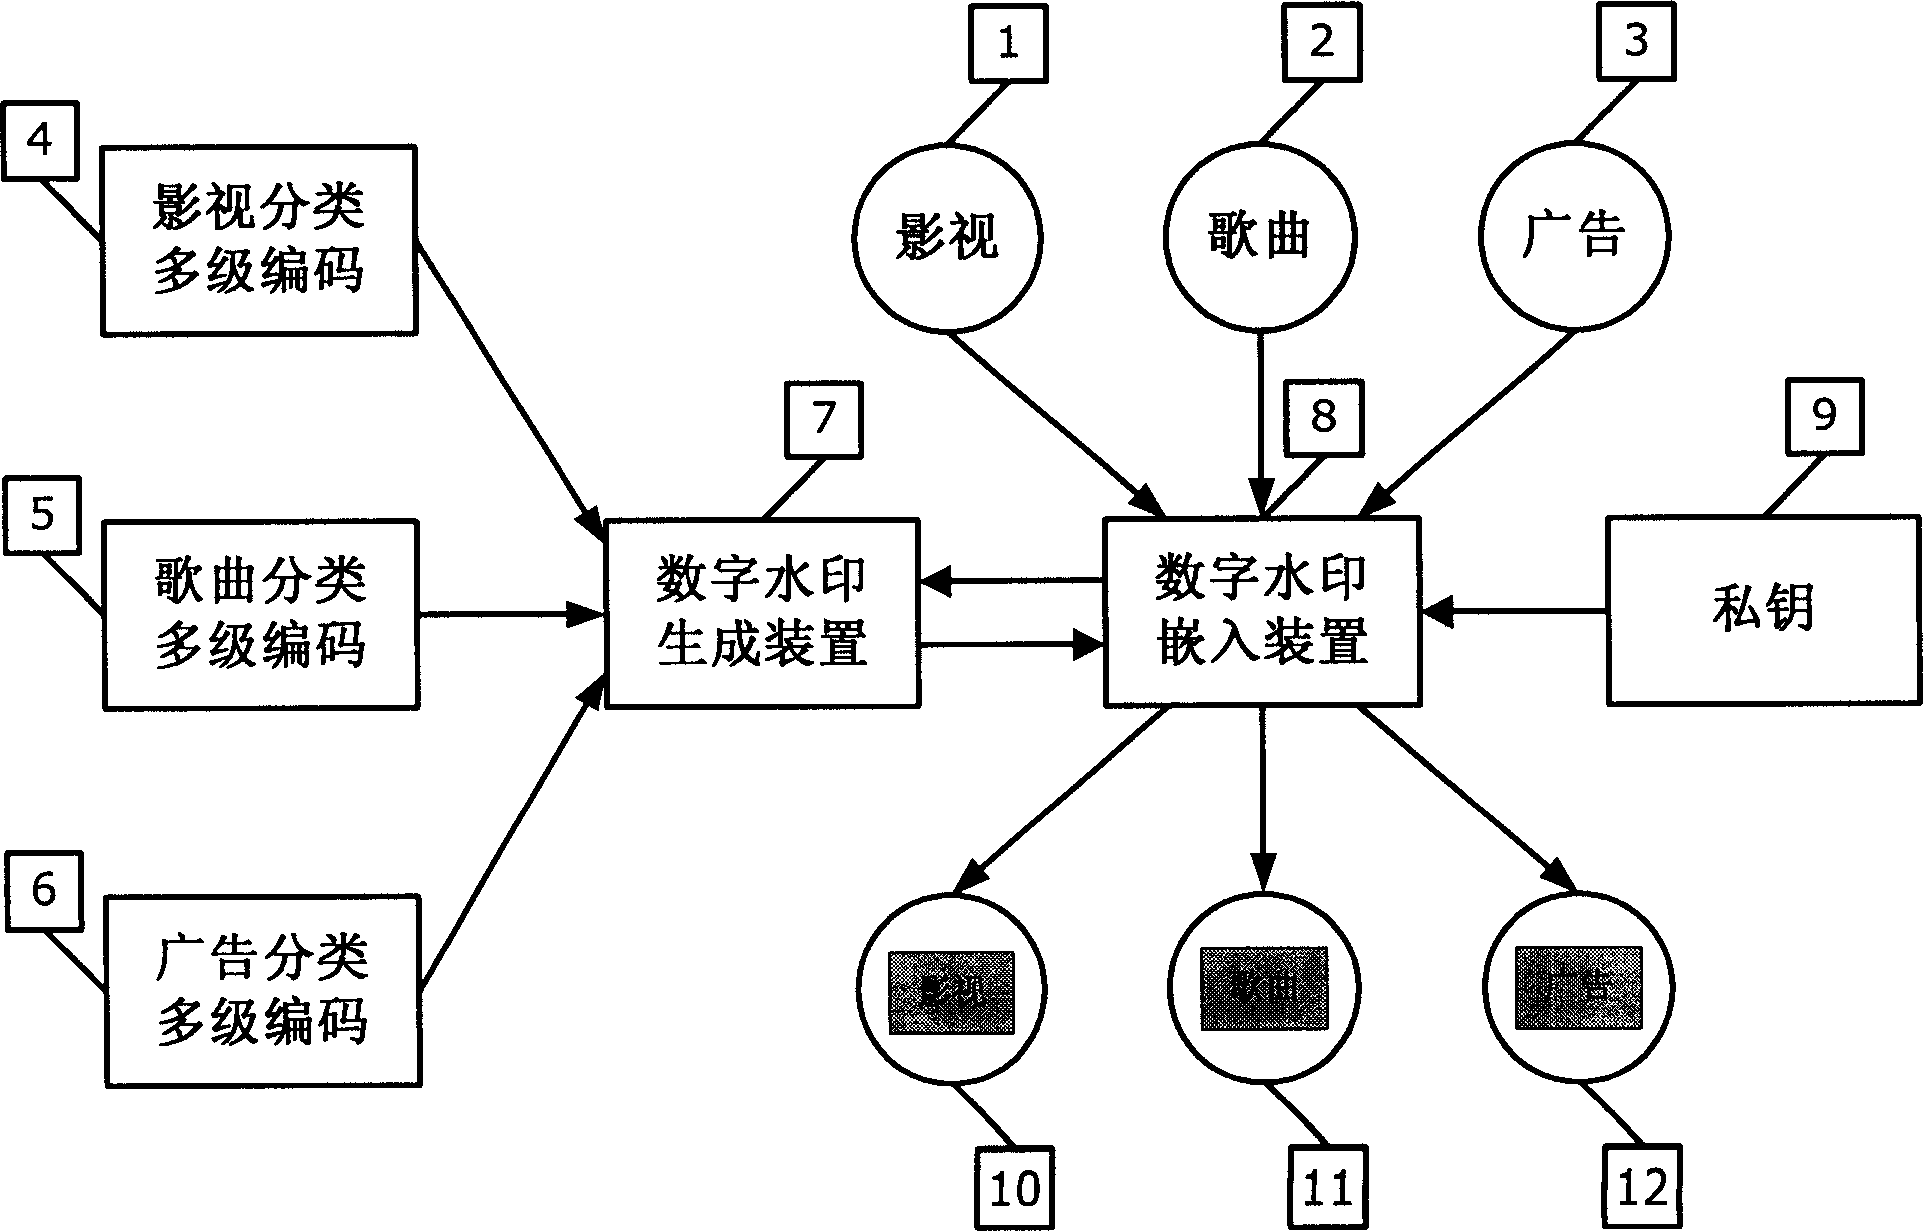 Dgital watermark of television content detection based on key, and its coding/decoding device